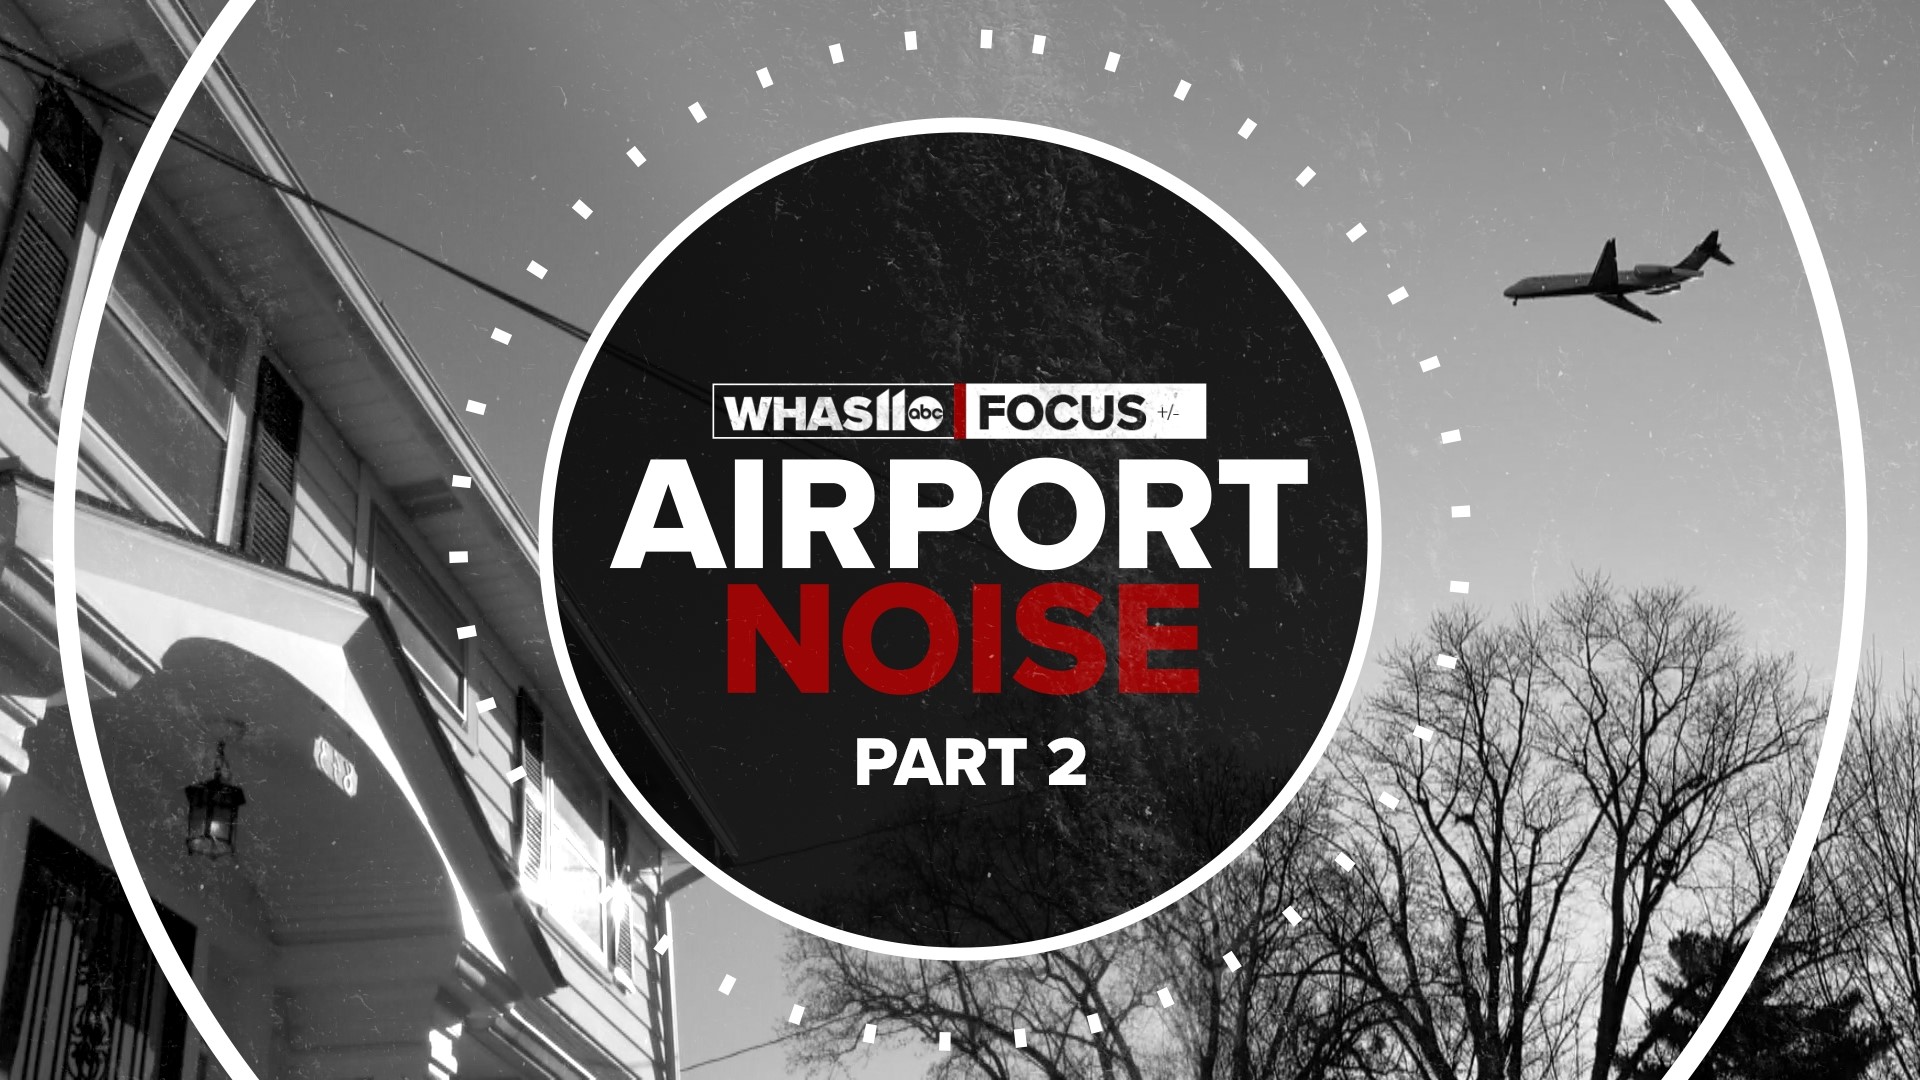 In order to get sound insulation,, homeowners need to sign a contract saying they won't sue the airport for any impacts from flights over their property.